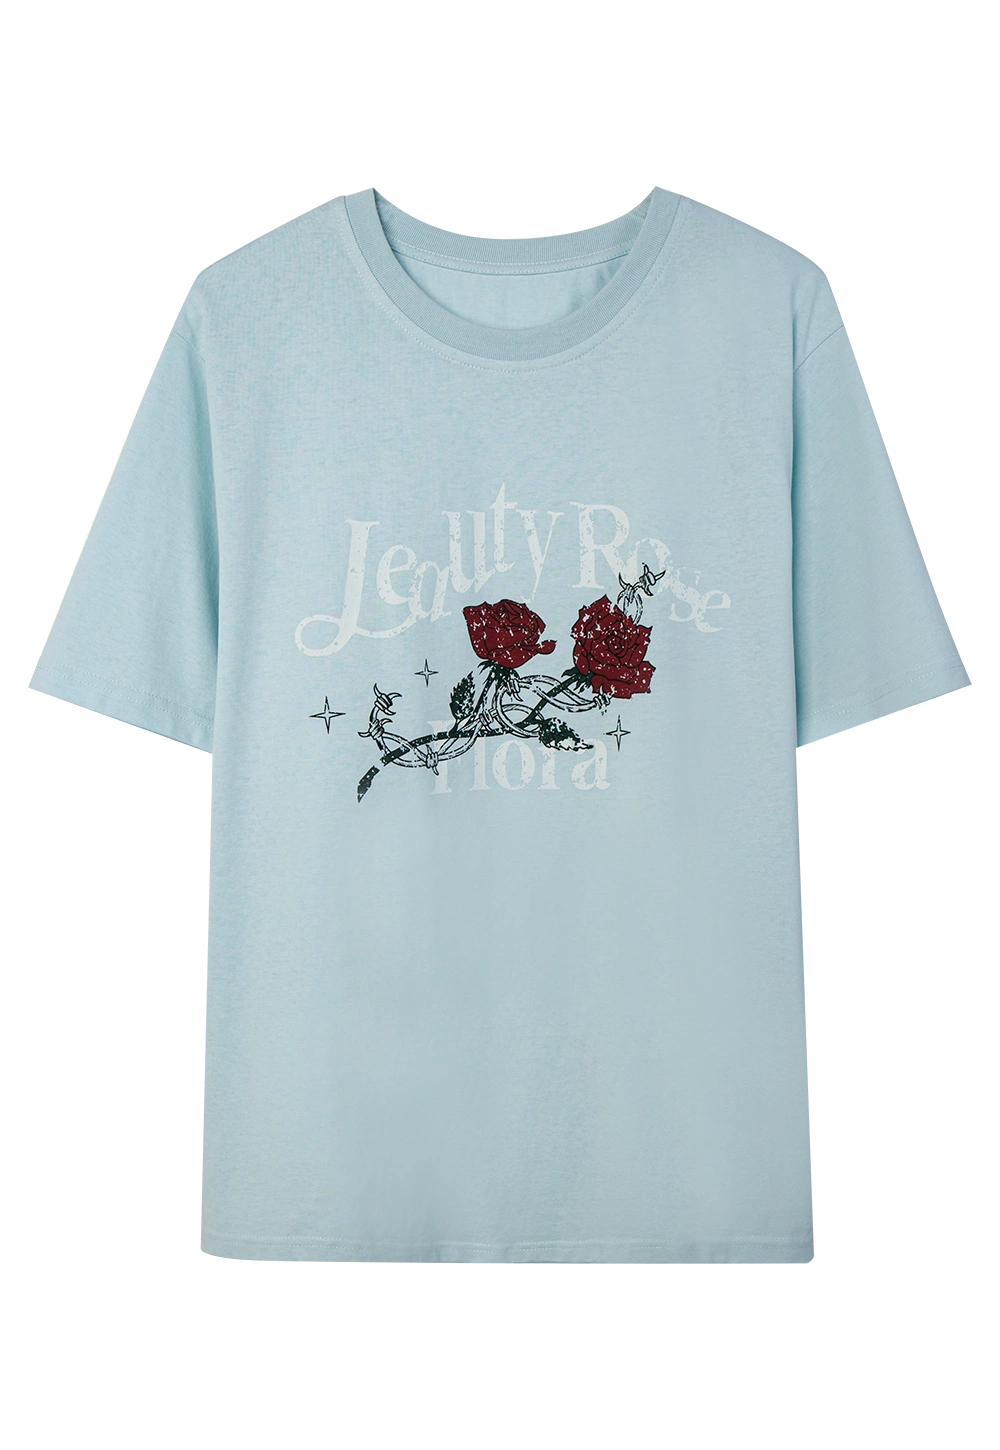 Women's T-Shirt with Red Rose Print and Elegant Script - Casual Cotton Tee